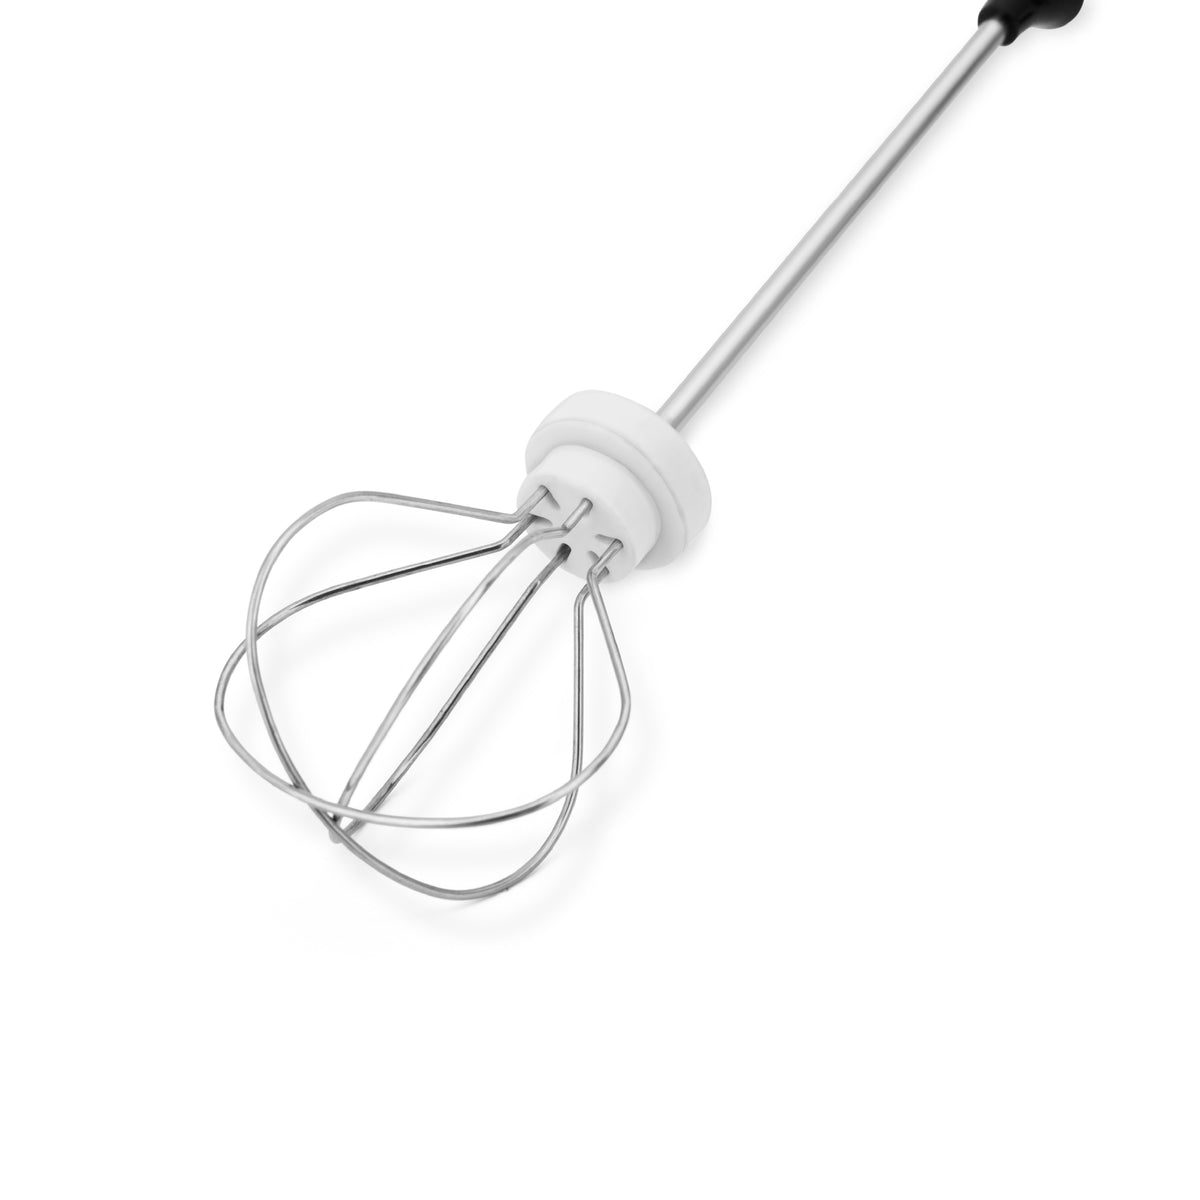 Larger Attachment of the EspressoWorks Handheld Milk Frother